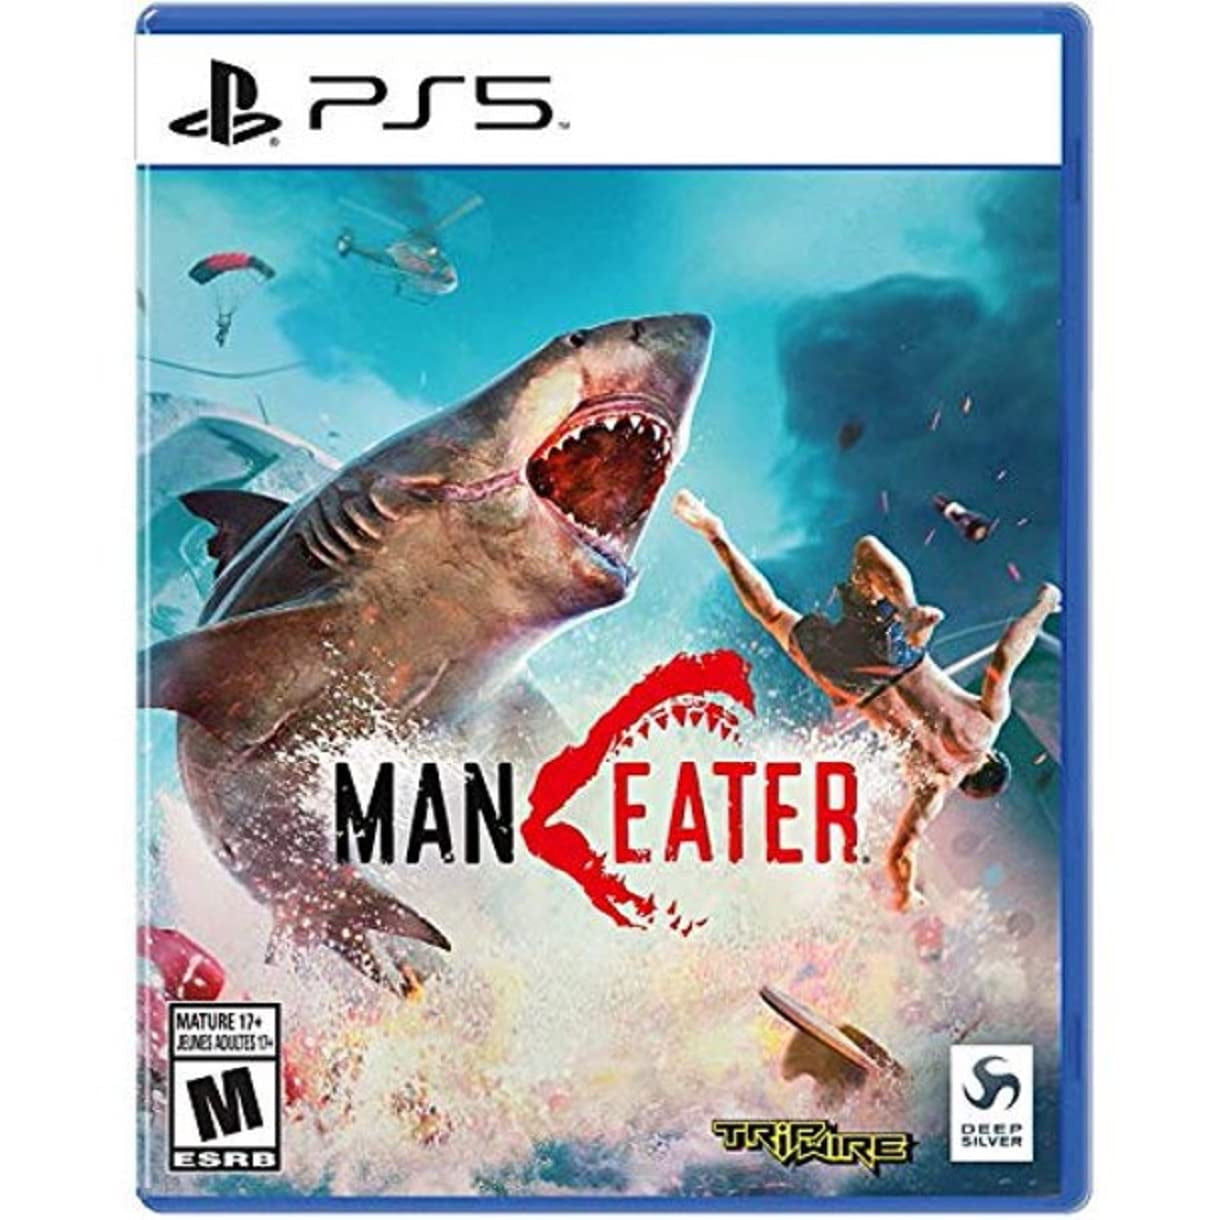 PS5 MAN EATER video game